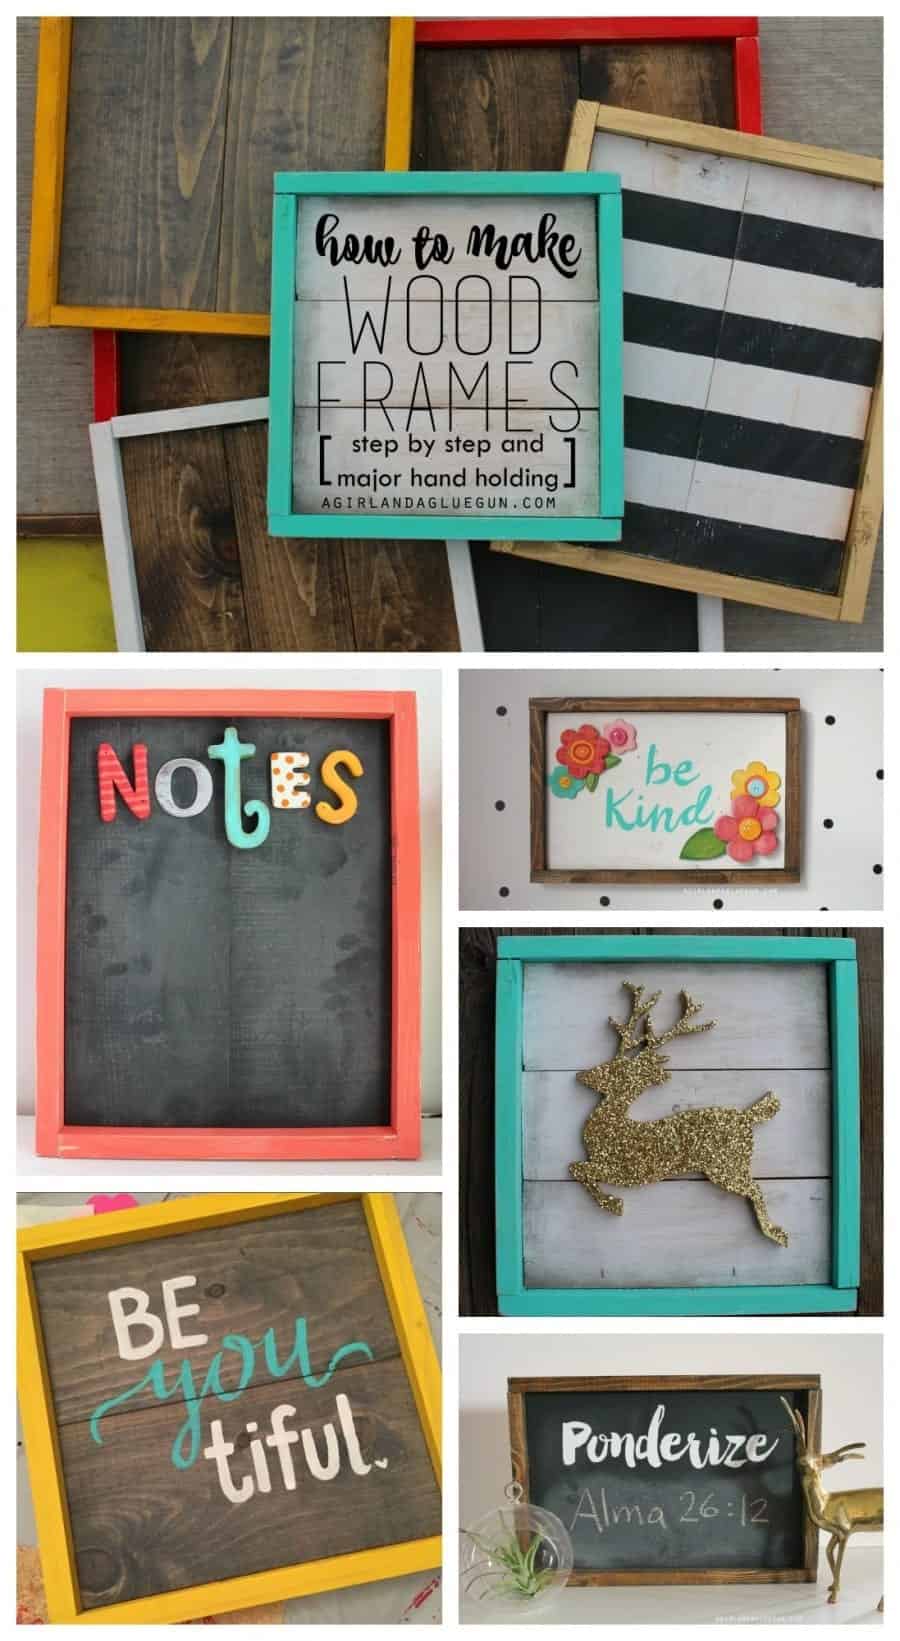 how-to-make-wood-frames-easy-diy-with-step-by-step-instructions-Lots-of-fun-decorations-ideas--900x1641